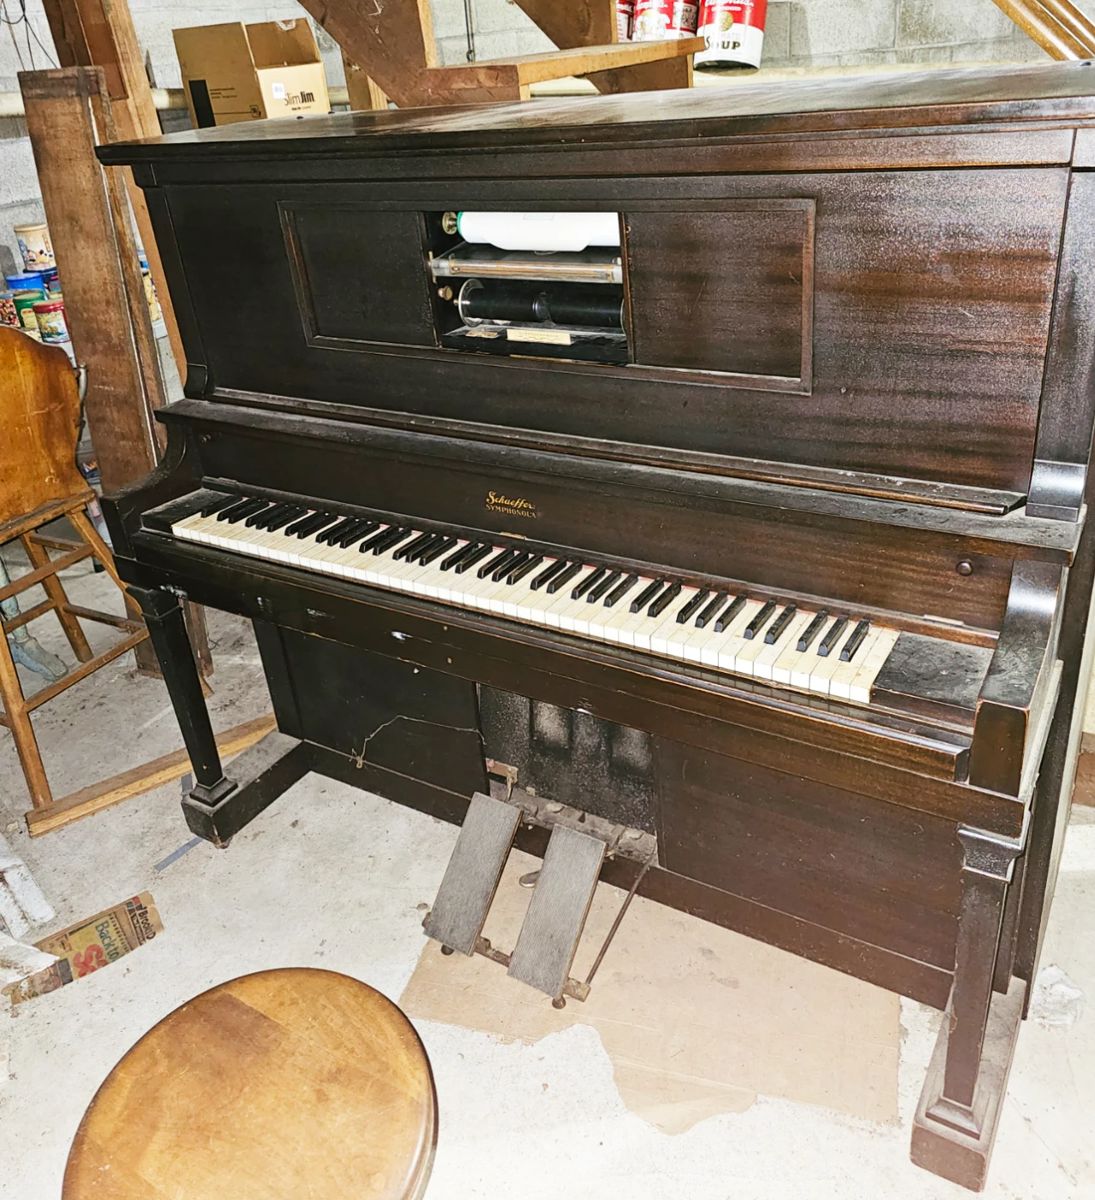 Schaeffer "Symphonola" Player Piano.  Playable, Partially Restored